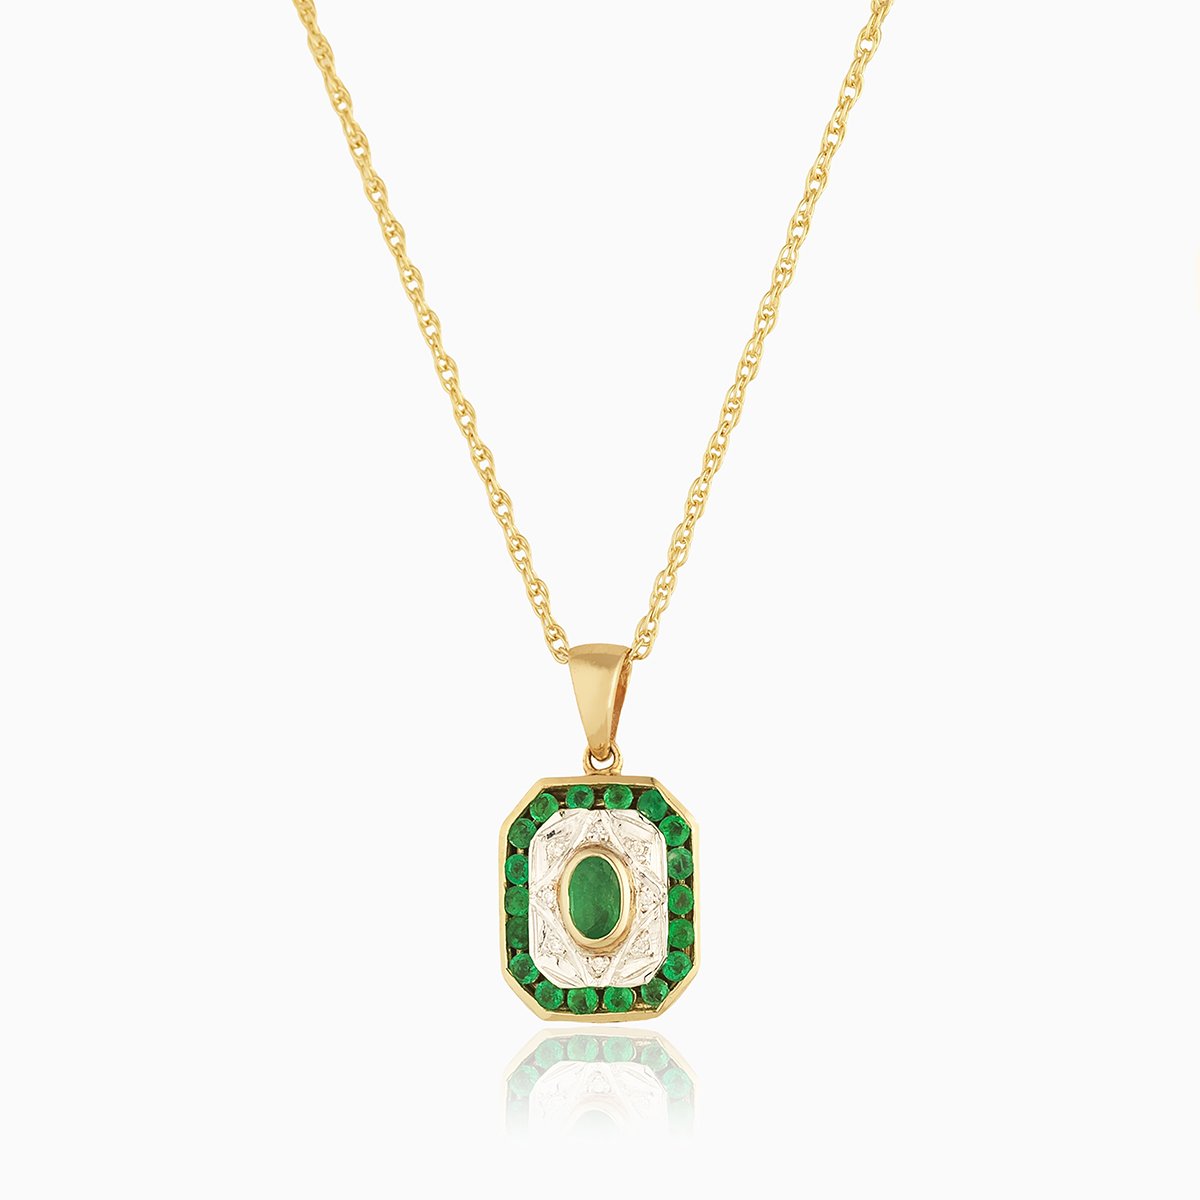 Tabular shaped 9 ct gold locket set with emeralds and diamonds , on a 9 ct gold rope chain